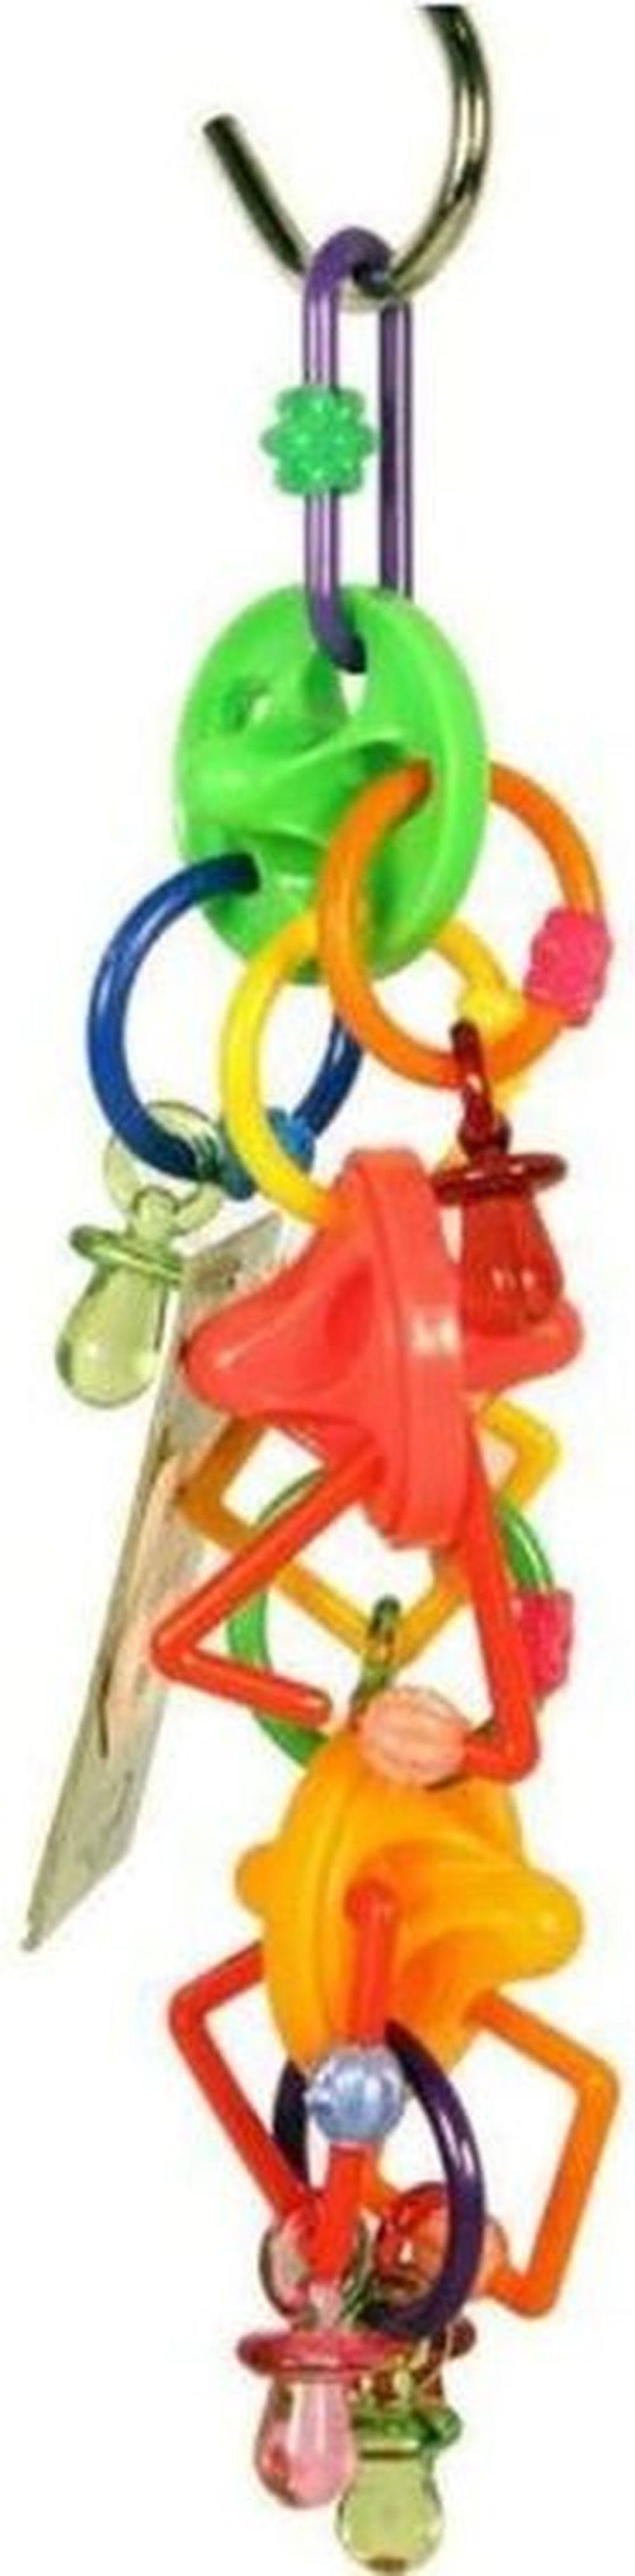 A And E Cage Co. Spinners And Pacifiers Bird Toy